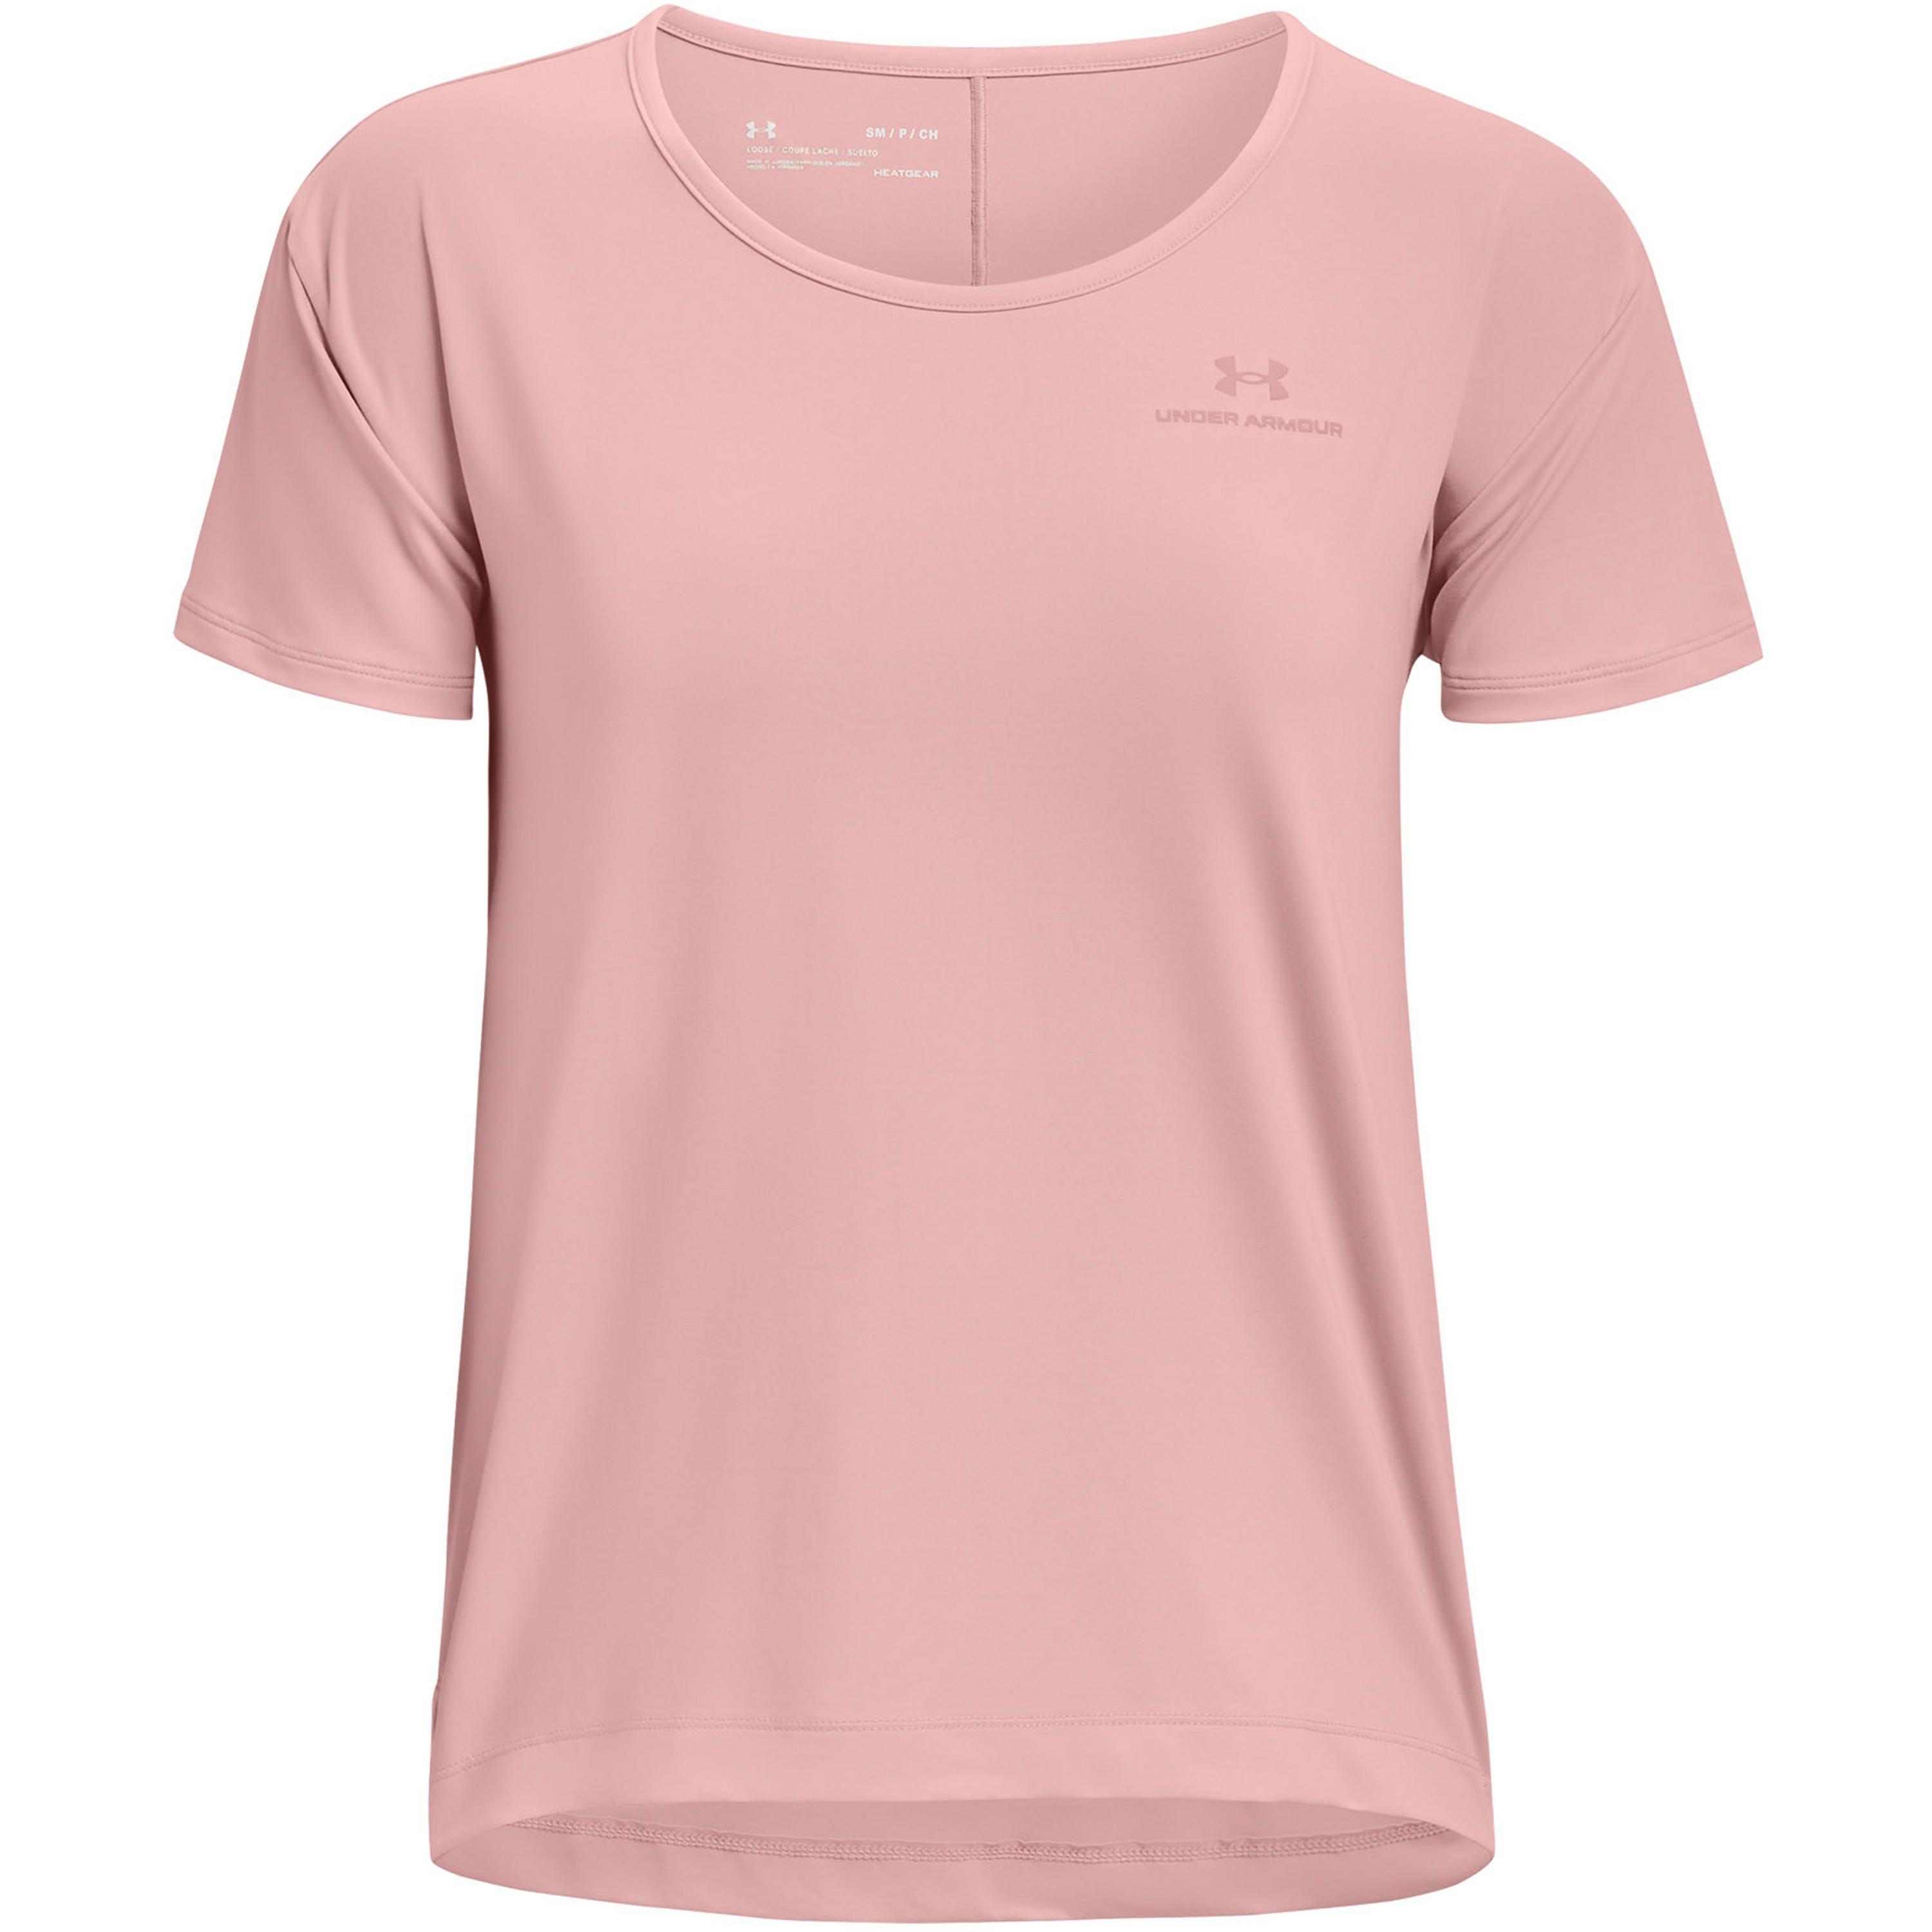 Image of Under Armour Rush Energy Core Funktionsshirt Damen